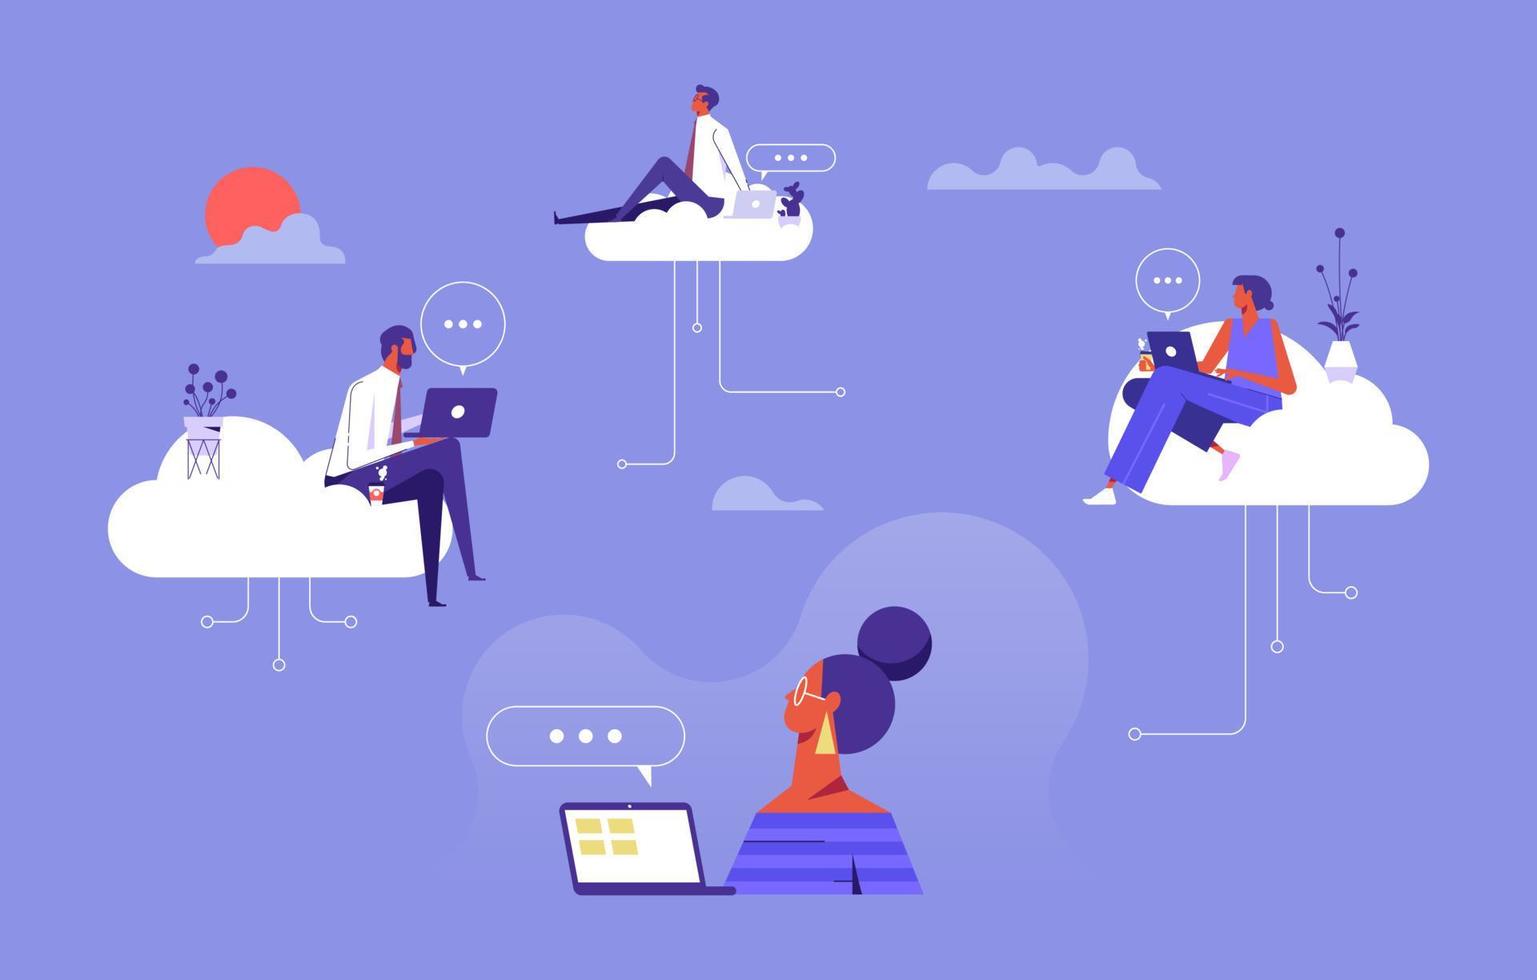 people sitting on the clouds in the sky using laptop and working on a cloud, social networking and texting using cloud storage, Cloud computing technology concept vector